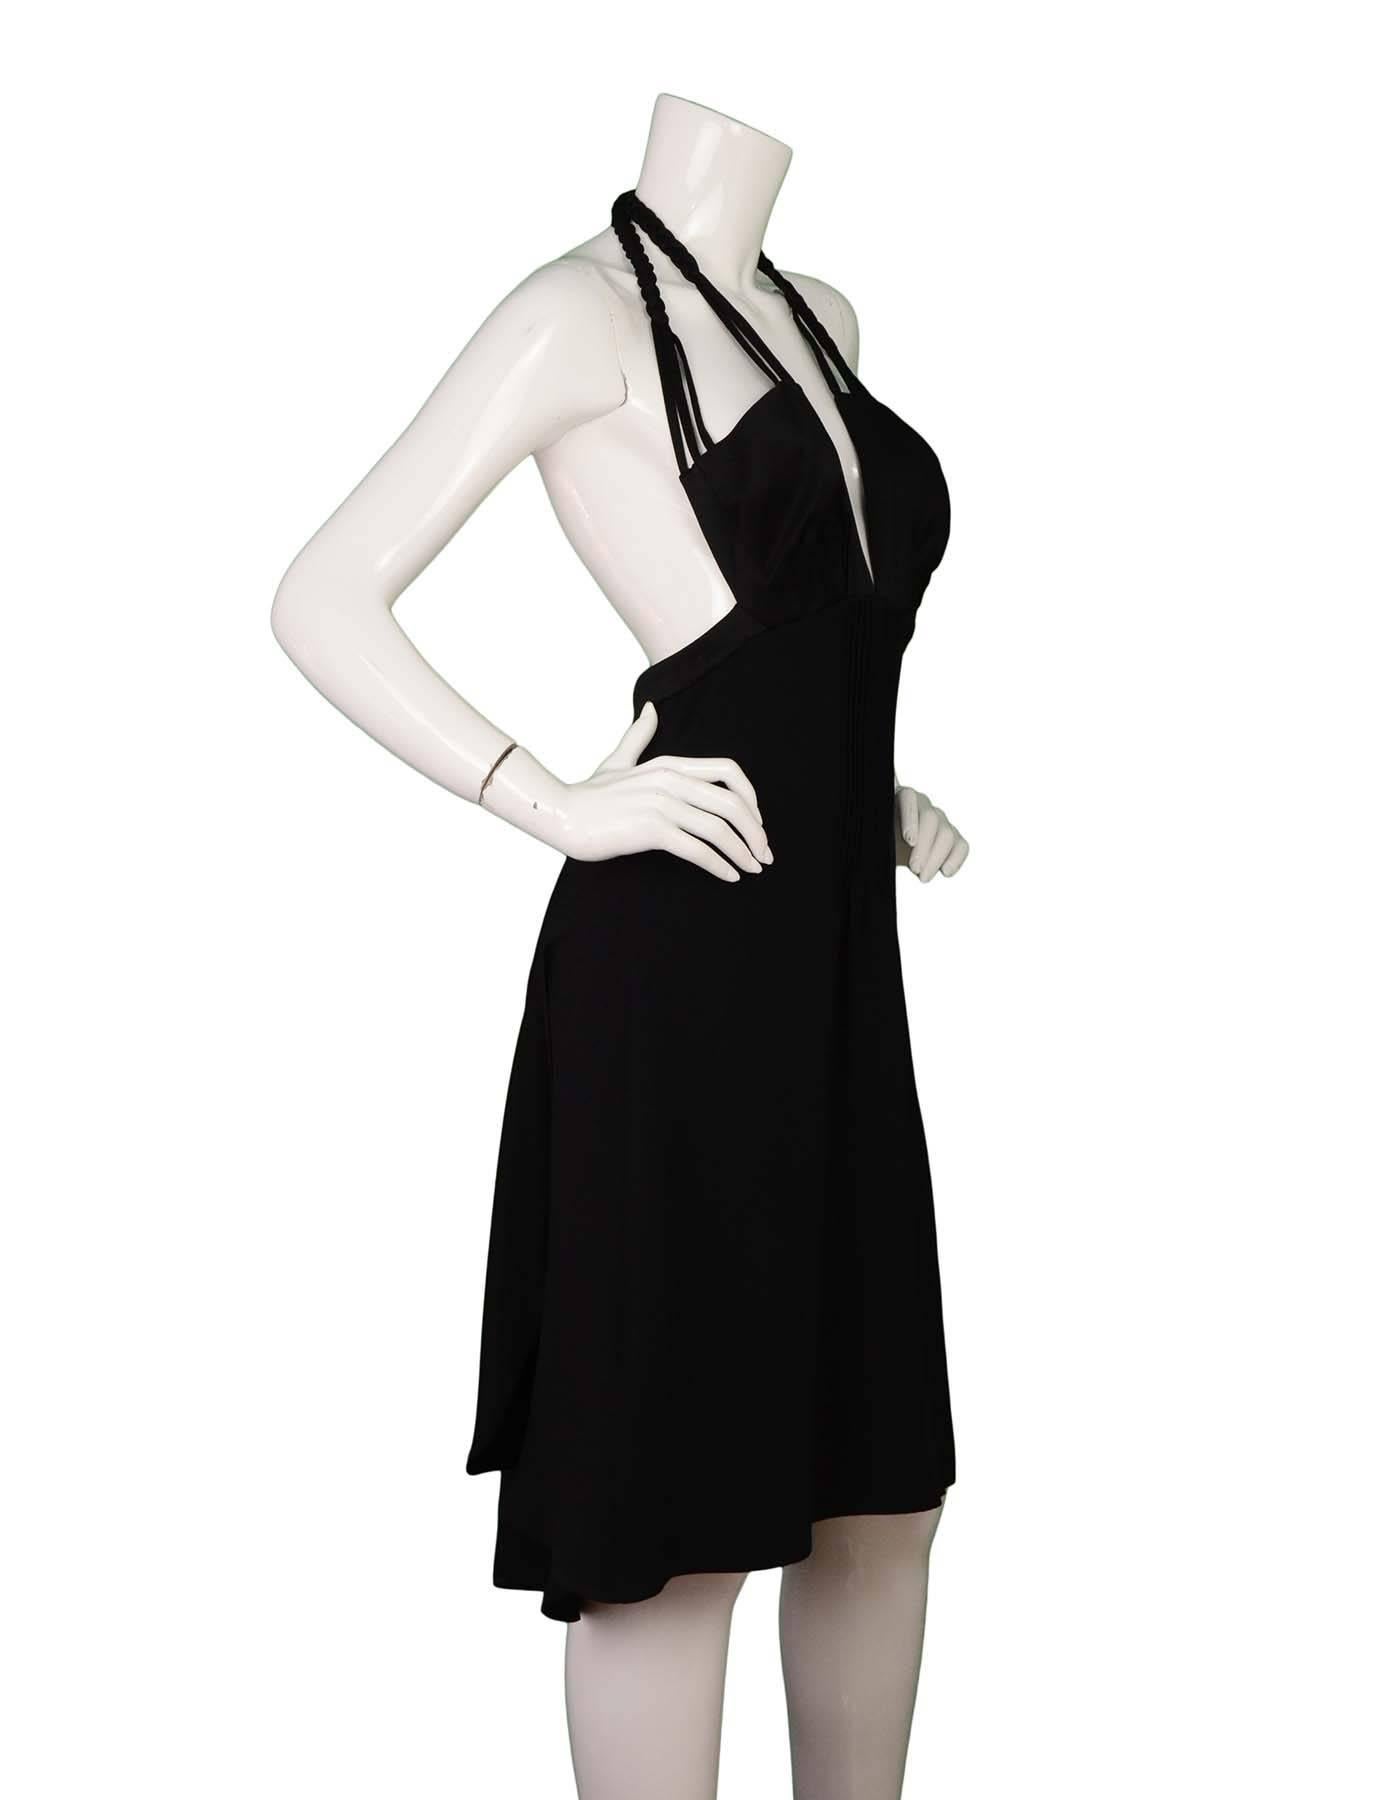 Miu Miu Black Silk Halter Neck Pleated Dress 
Features braided criss cross straps
Year of Production: 2011
Color: Black
Composition: Not given- believed to be a silk blend
Lining: Black, silk-blend
Closure/Opening: Back center zip up
Exterior